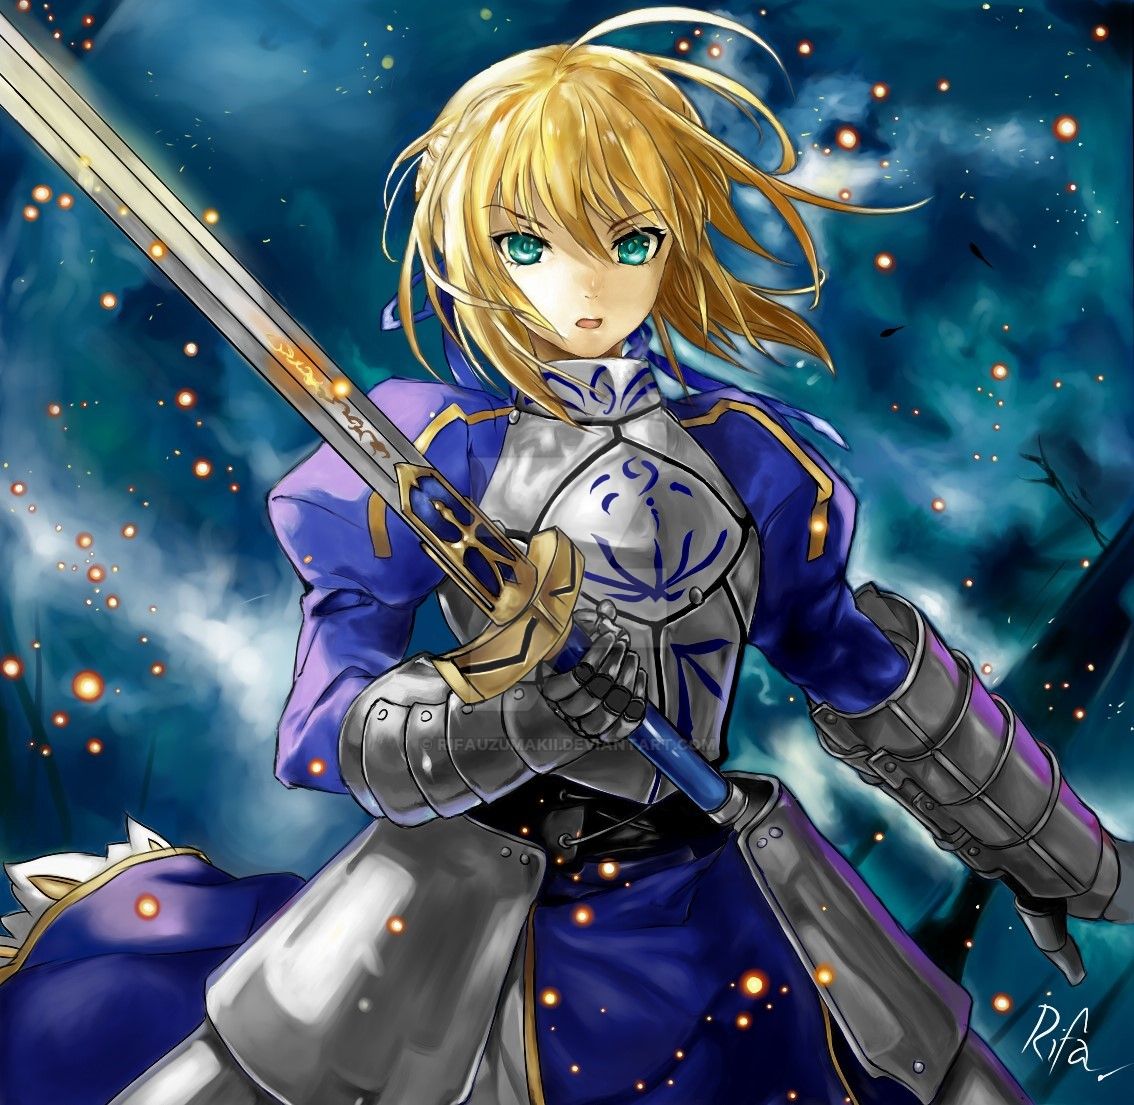 Saber From Fate/Stay Night by rifauzumakii on DeviantArt